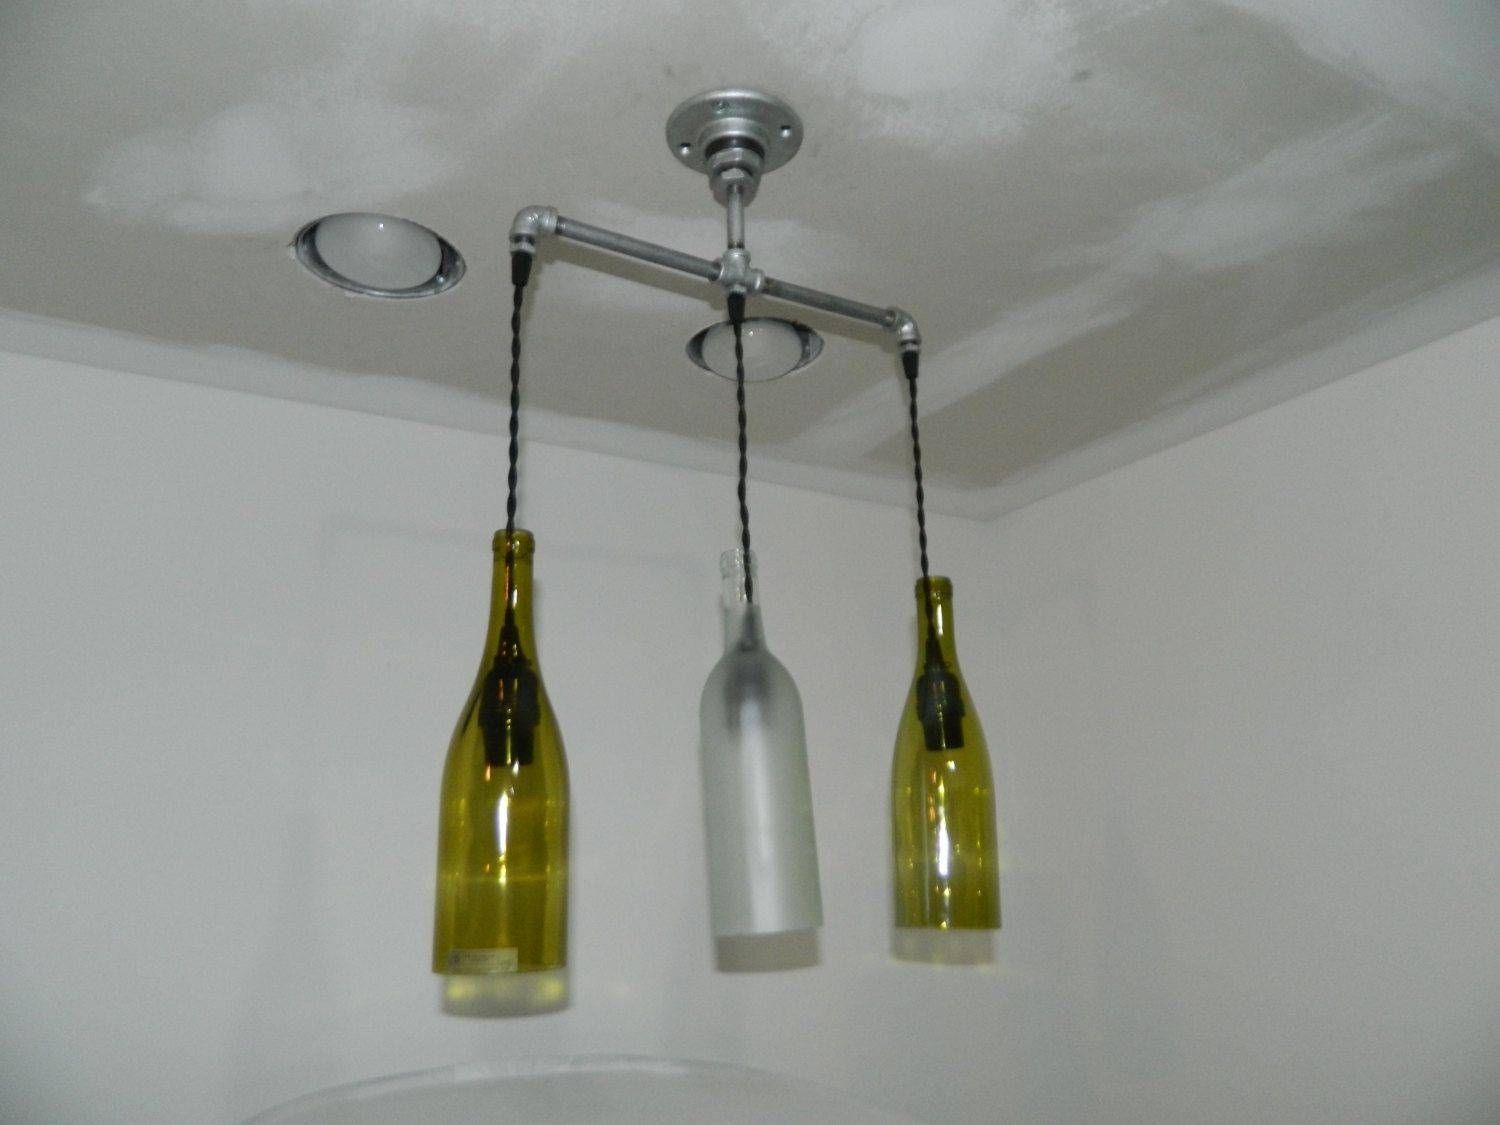 Hand Crafted Wine Bottle Tri Pendant Lightmilton Douglas Lamp Within Wine Glass Lights Fixtures (View 12 of 15)